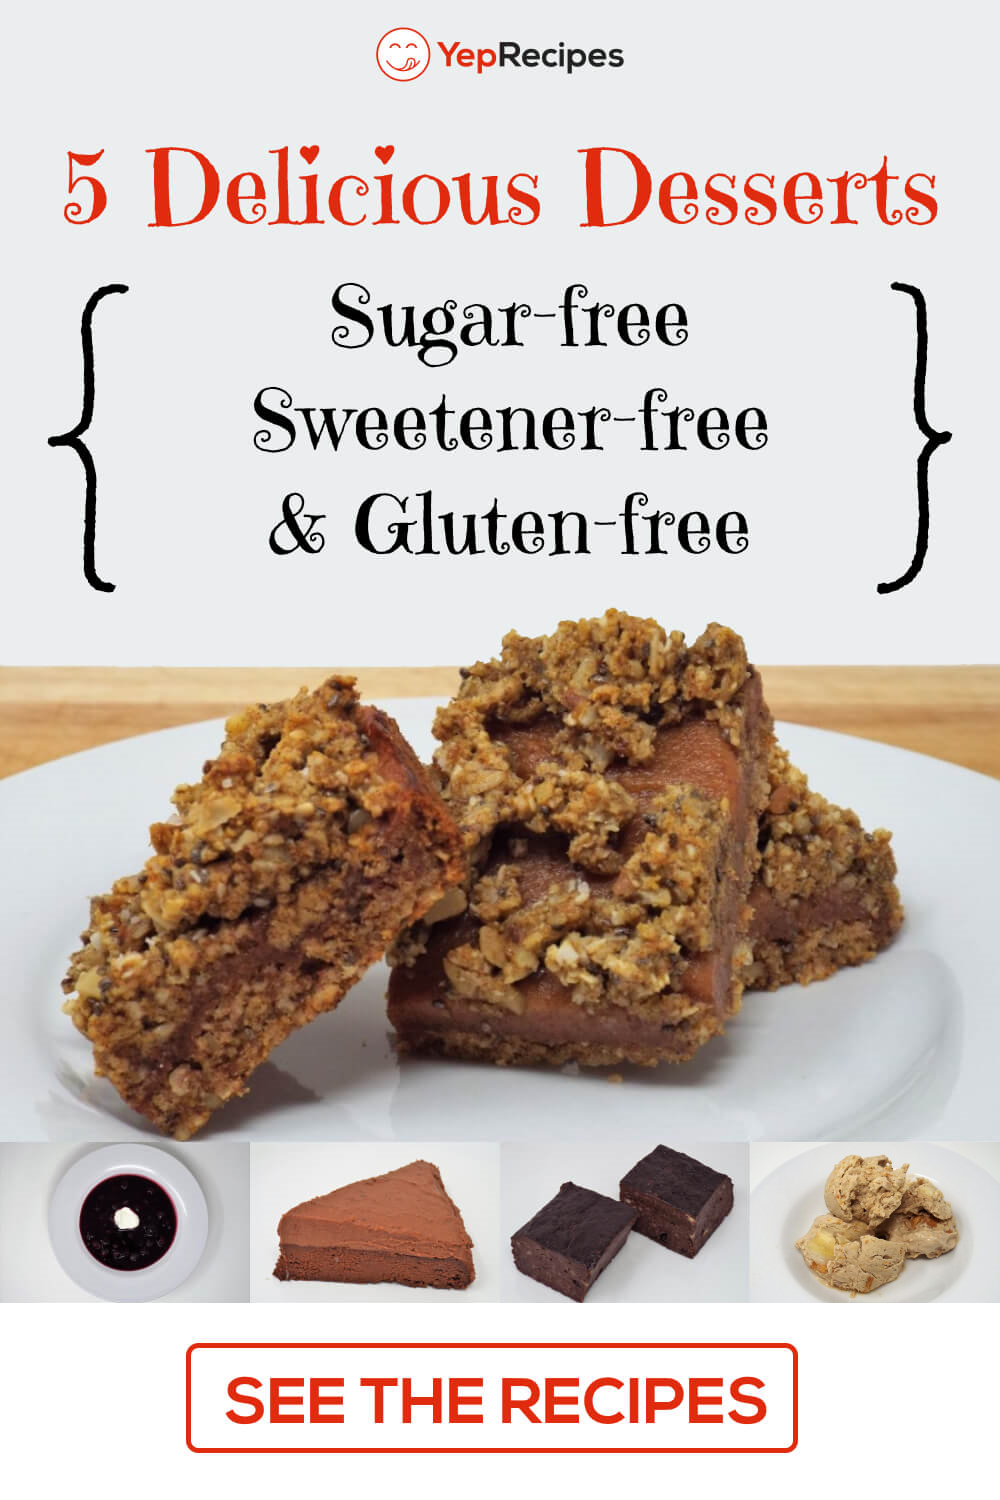 5 Delicious Desserts that are Sugar-free, Sweetener-free, and Gluten-free